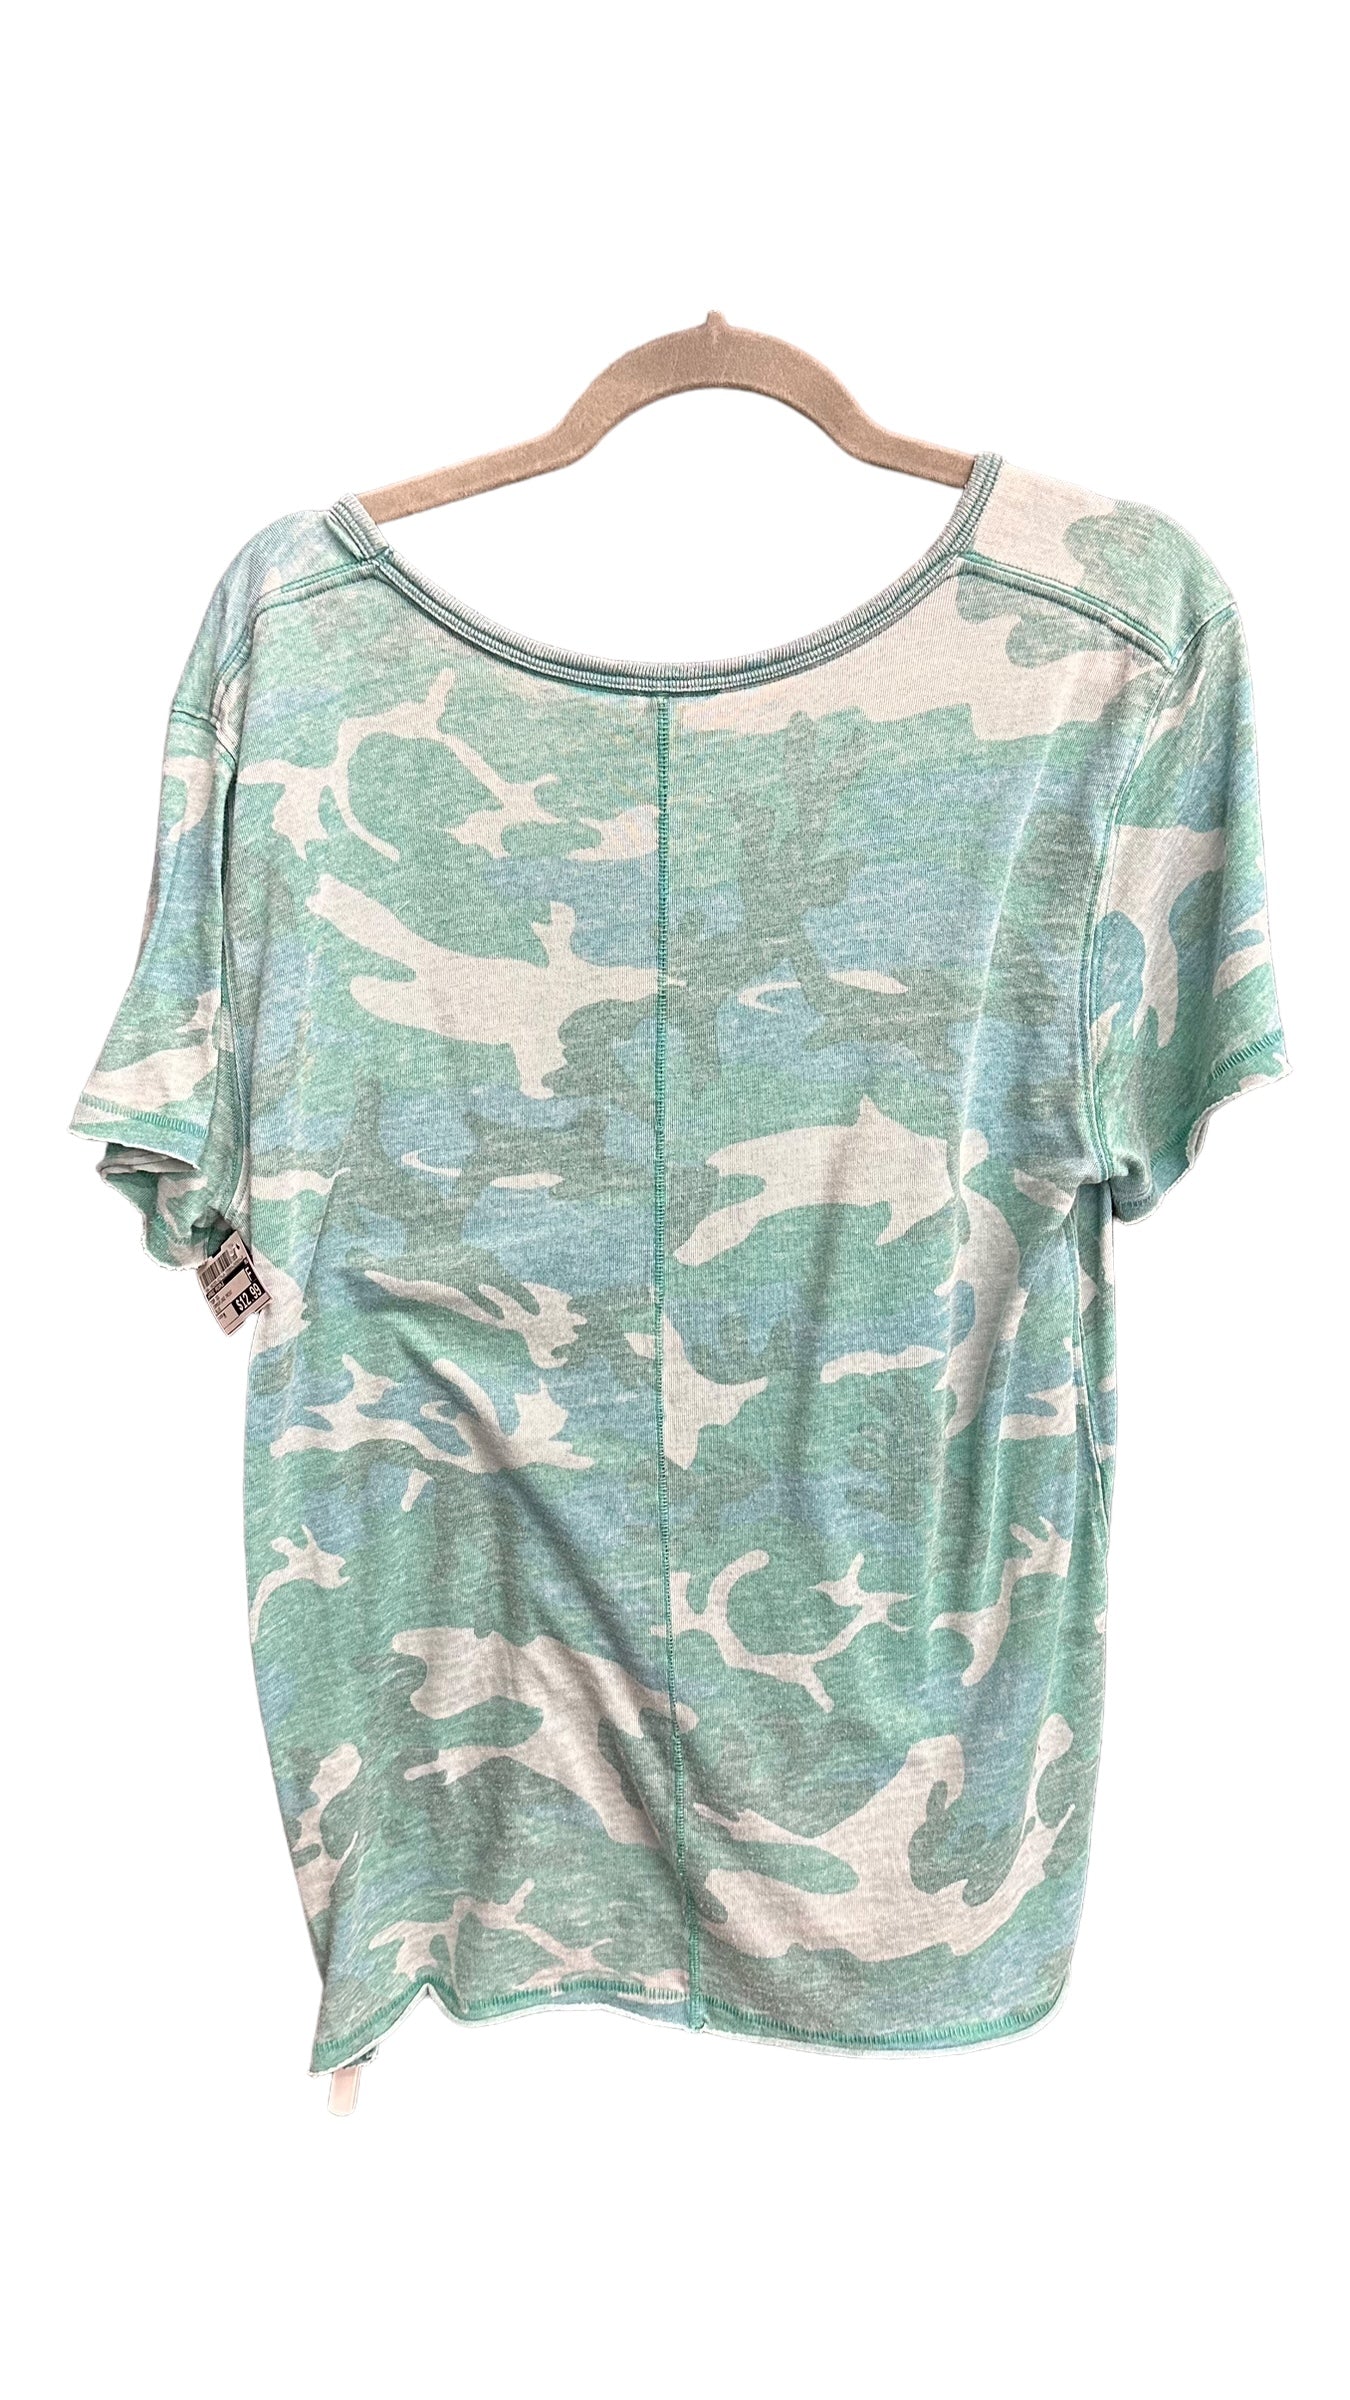 Camouflage Print Top Short Sleeve Free People, Size M